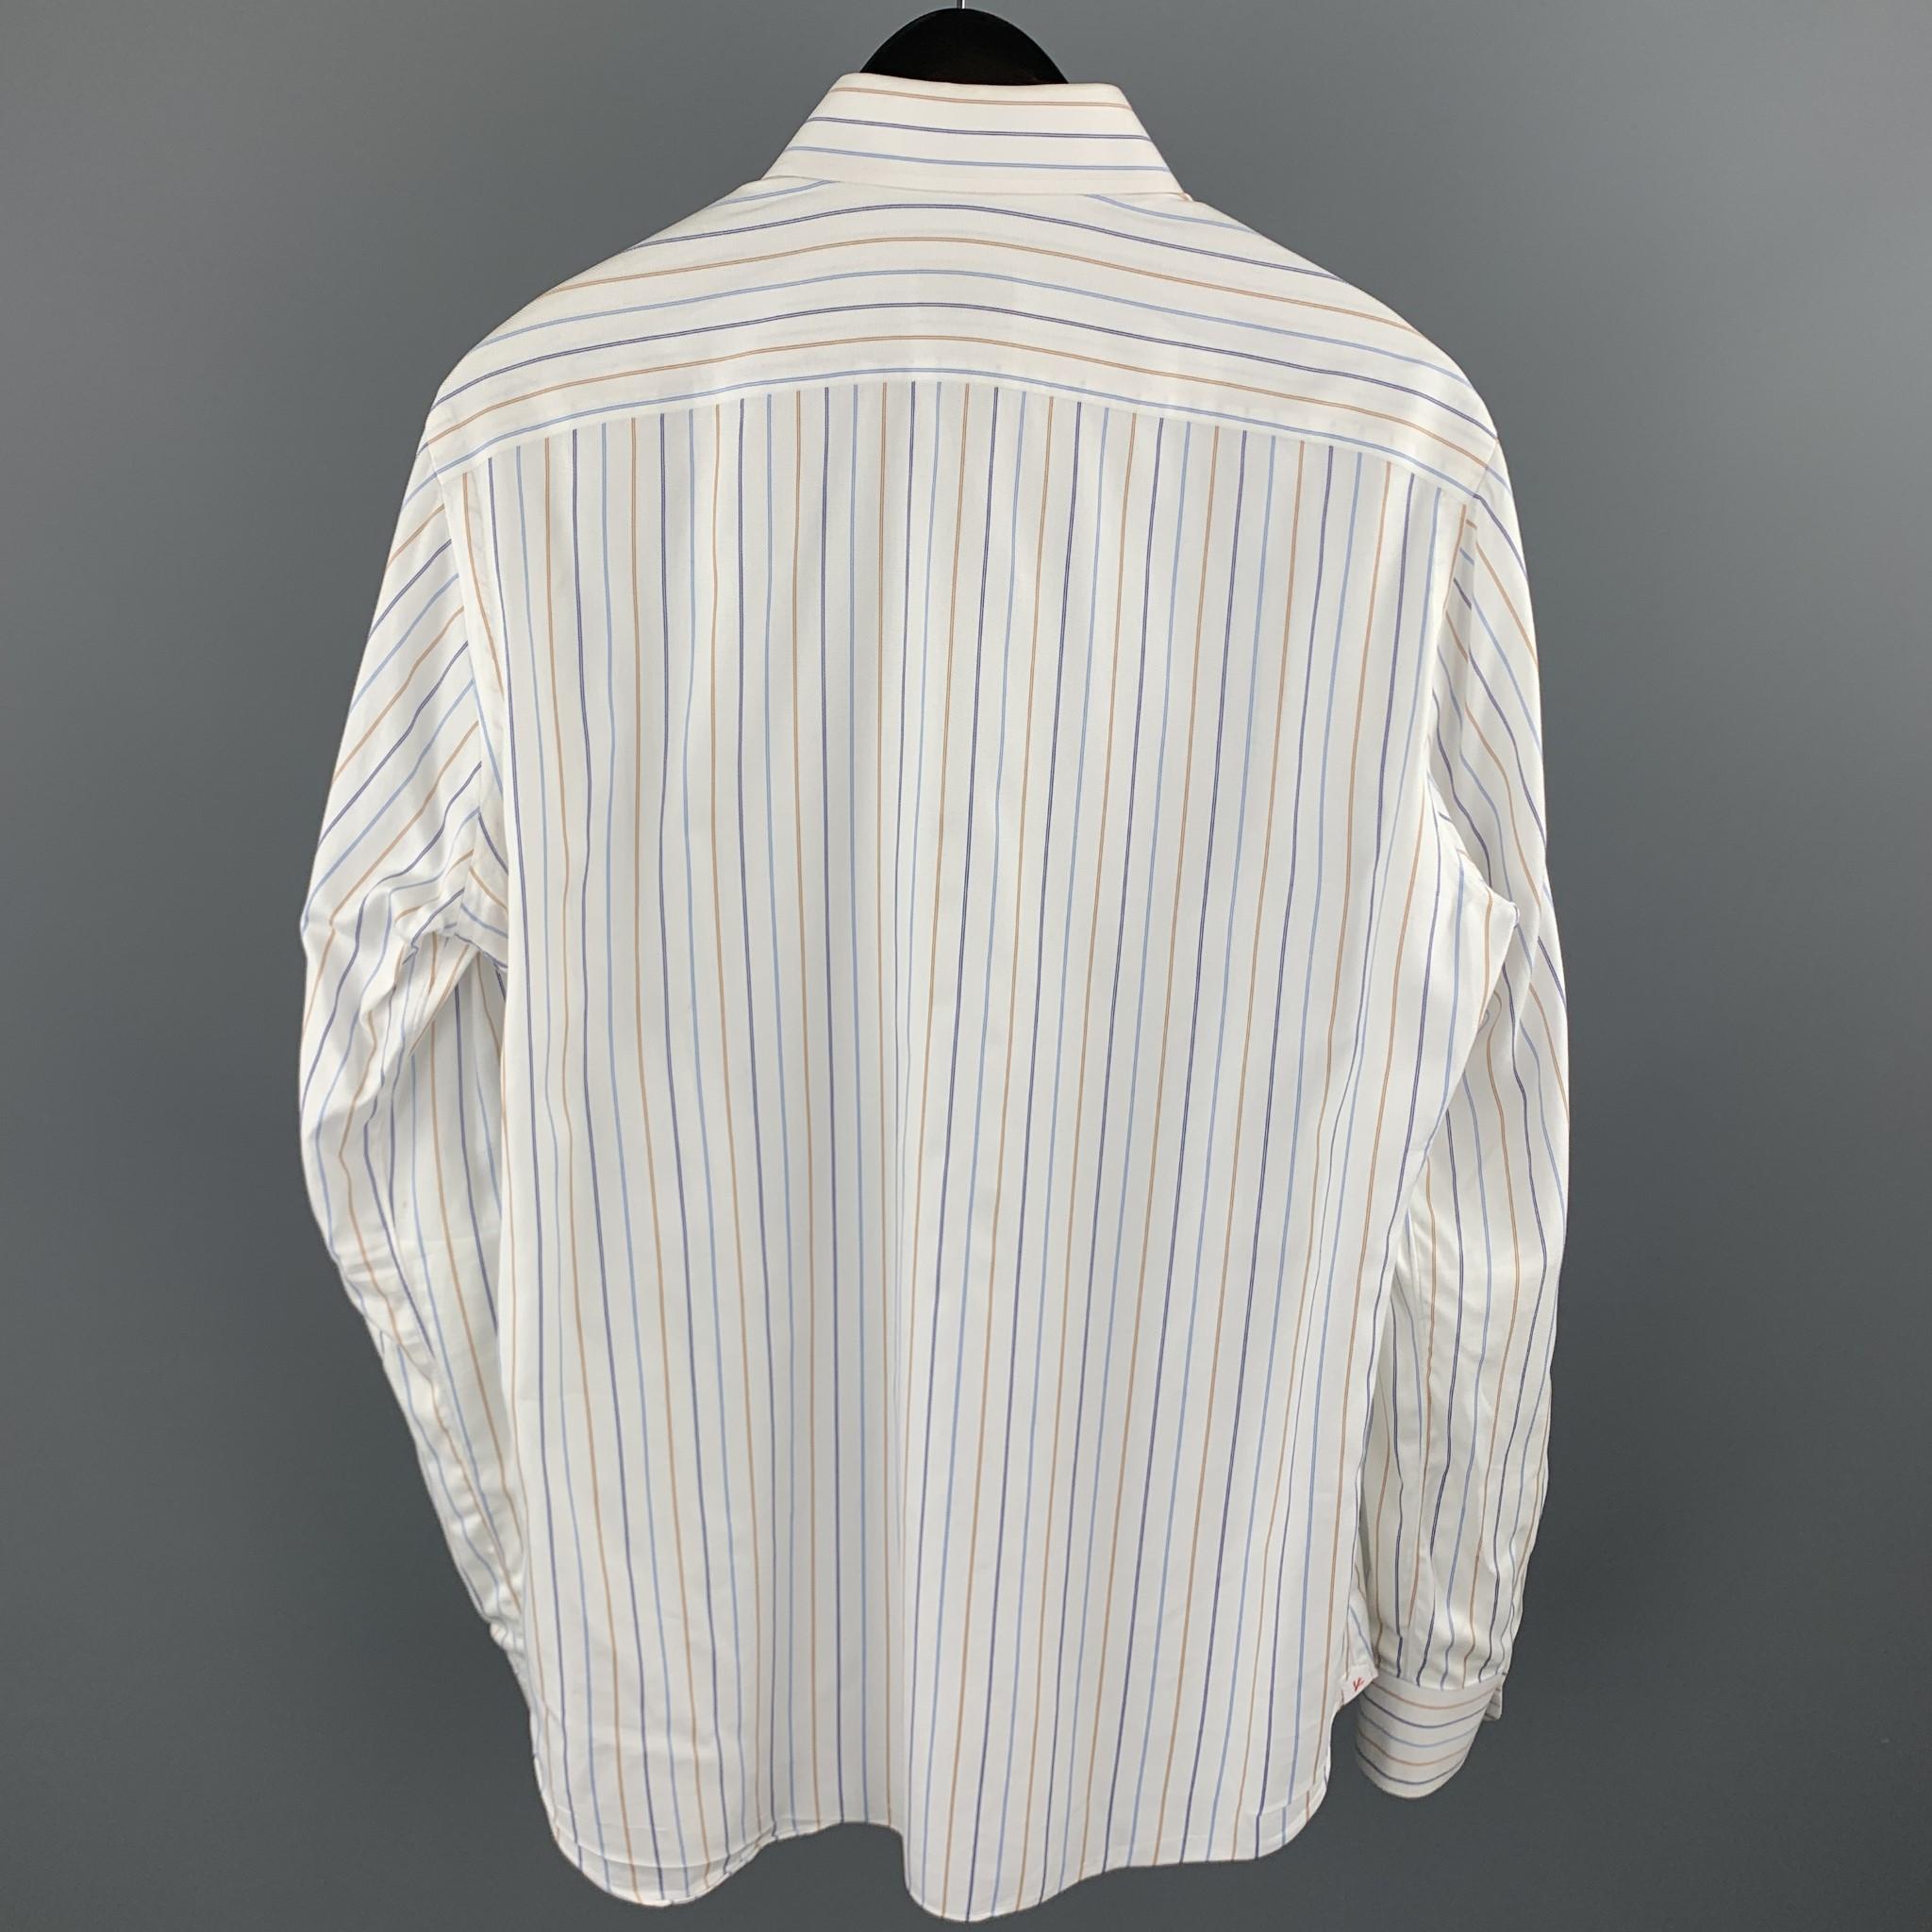 ISAIA long sleeve shirt comes in a white stripe cotton featuring a button up style and a spread collar. Made in Italy.

Excellent Pre-Owned Condition.
Marked: 40/15.5

Measurements:

Shoulder: 15.5 in. 
Chest: 42 in. 
Sleeve: 26.5 in. 
Length: 30.5